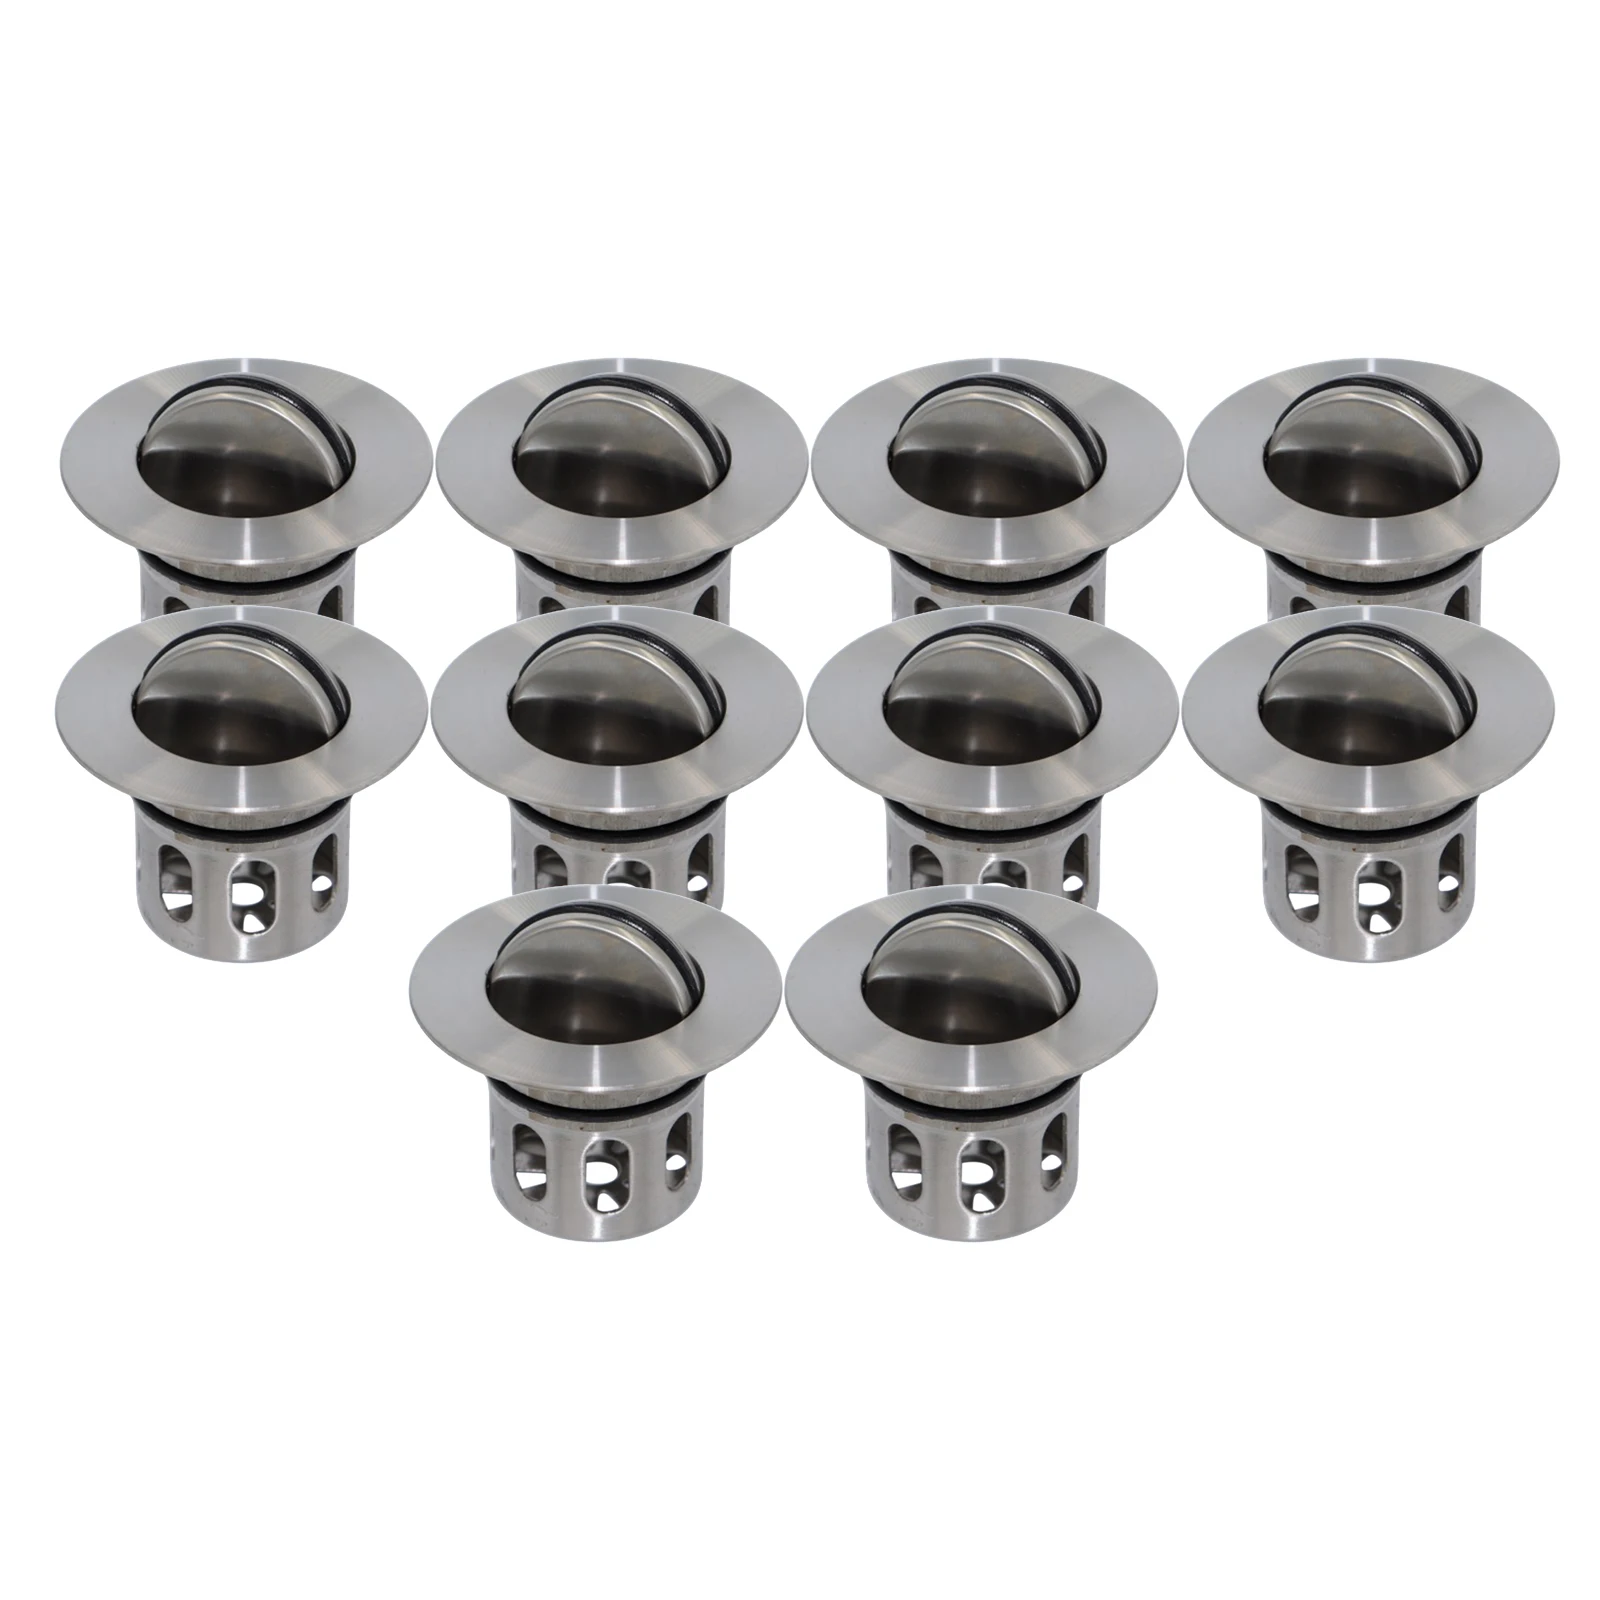 Stainless Steel Drain Plug Wash Basin Sink 10pcs Built-in Flap Basket Drain Filter Household Seal Replacement